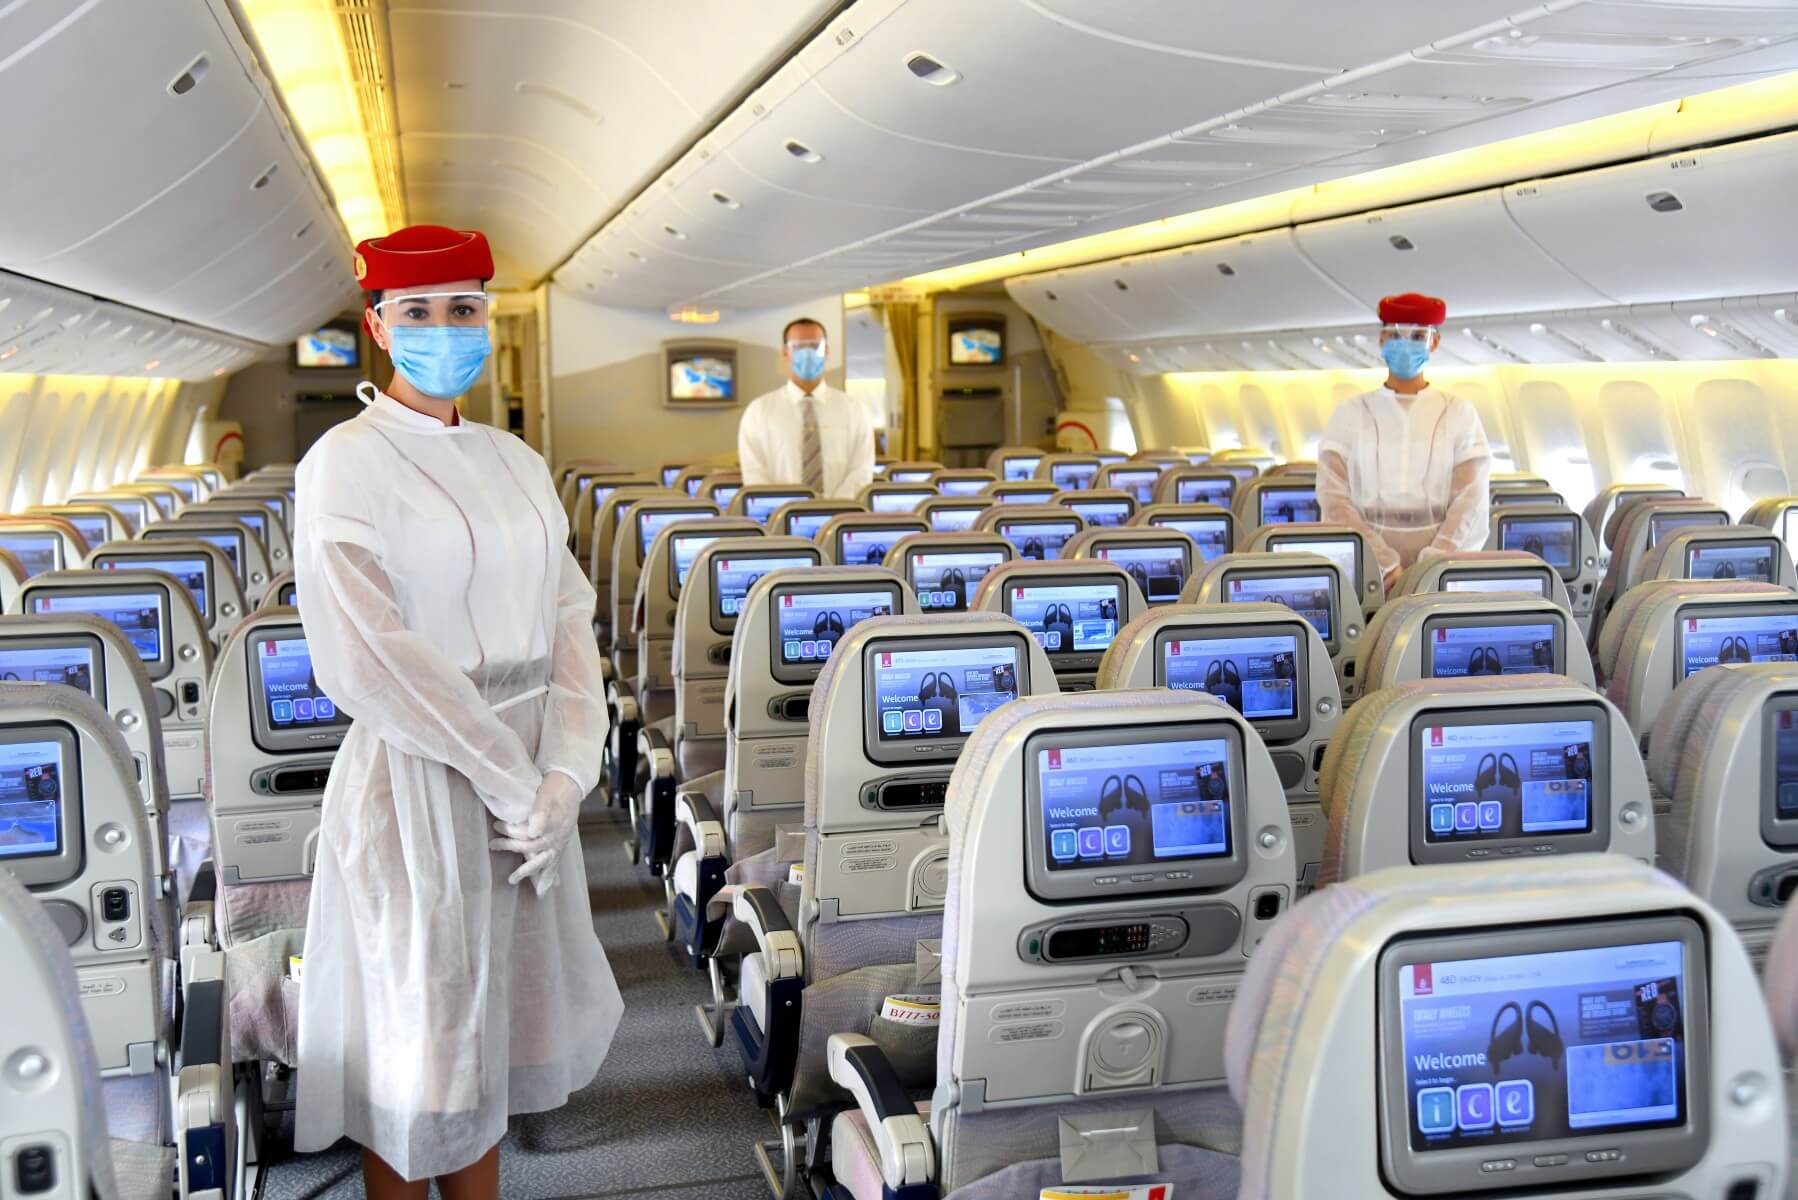 Emirates is the first airline to offer free COVID-19 cover to all passengers